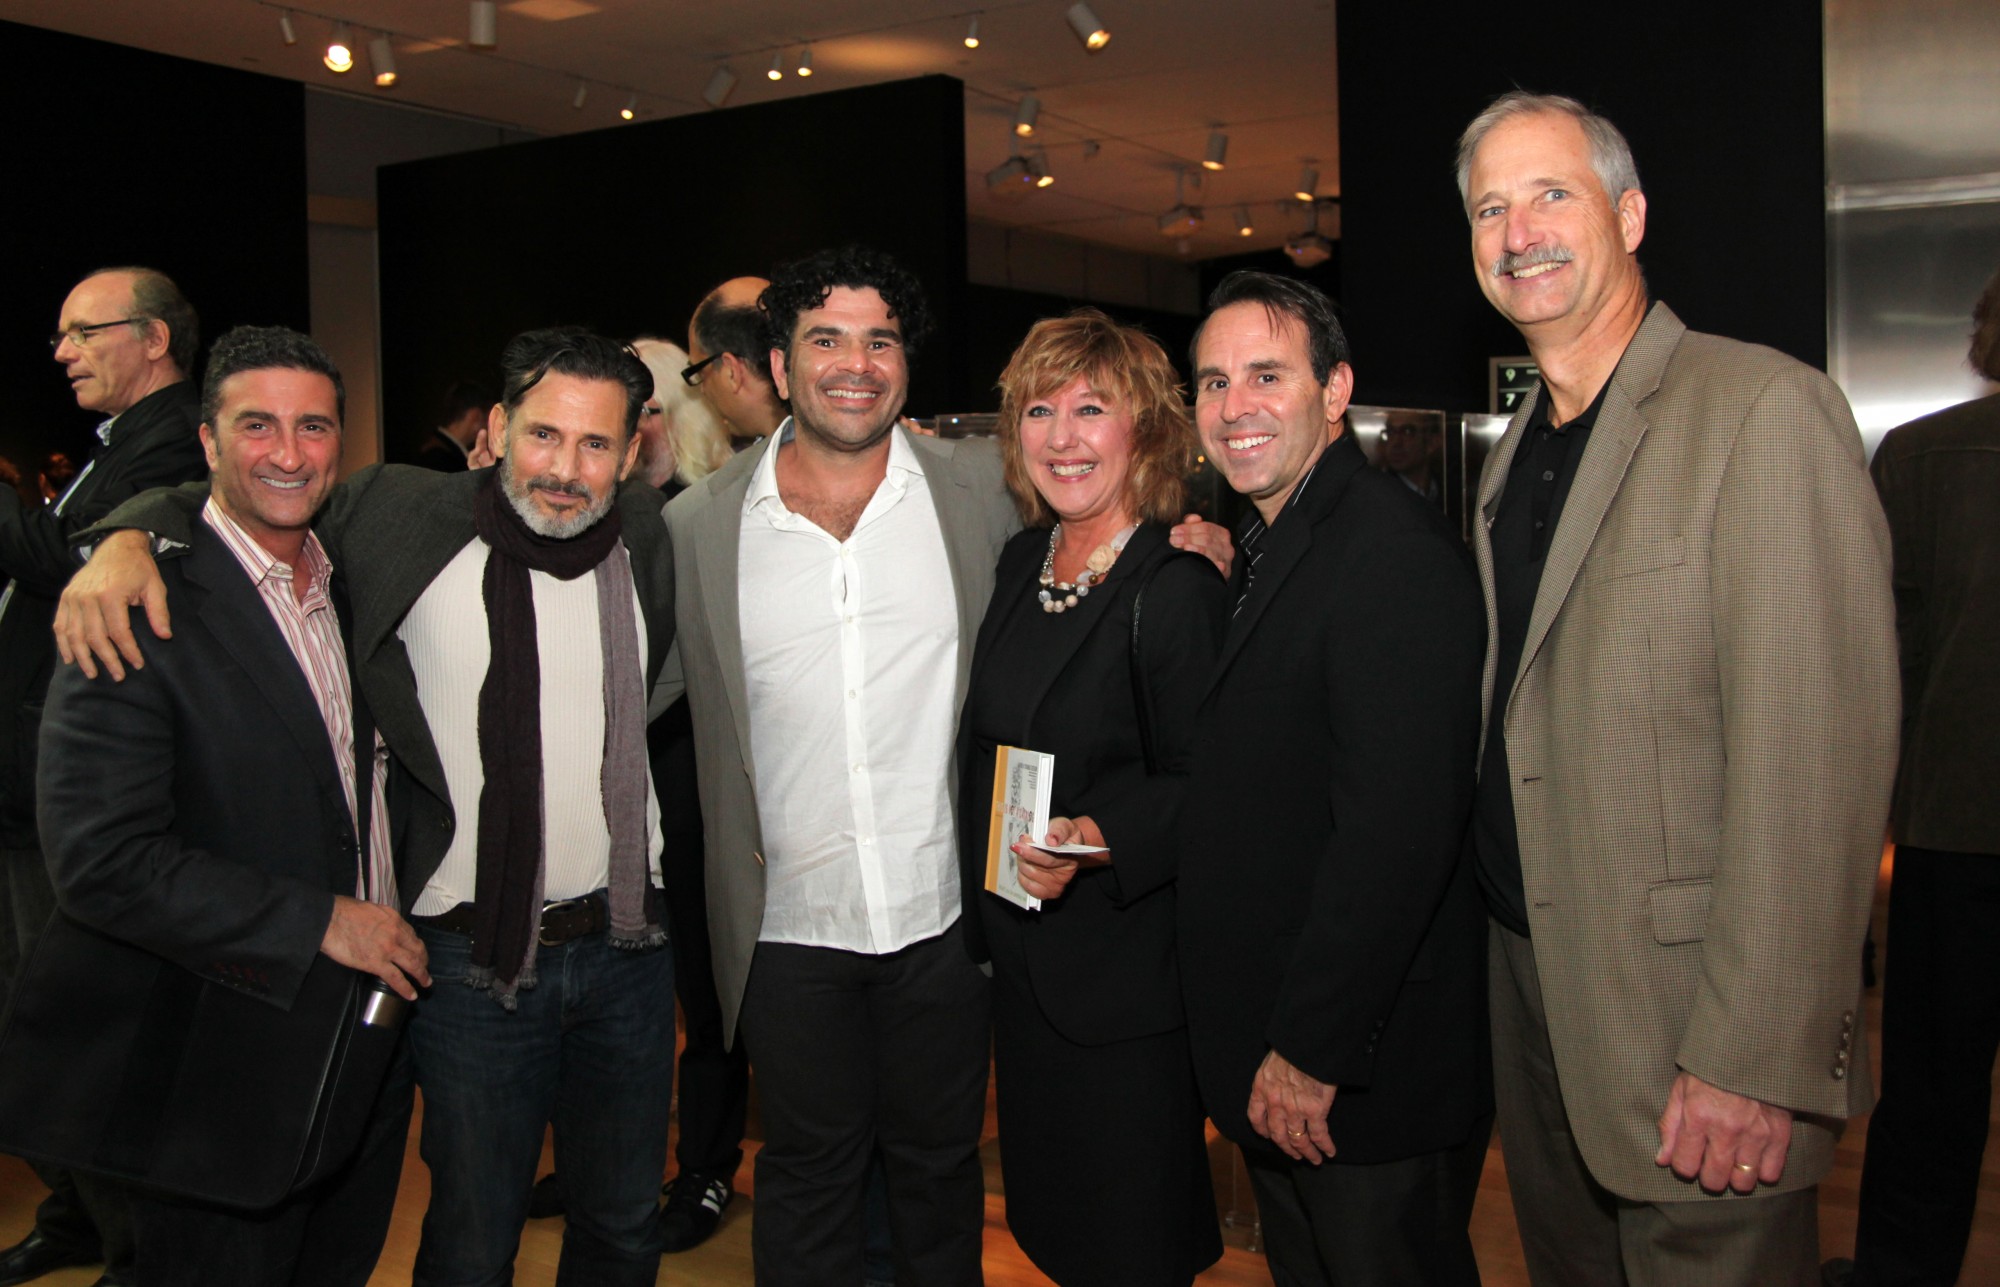 Stephen Mitchell, Aaron R. Thomas, Thomas Ruscica and the Lucite Lux team at the Out Of Hand exhibit opening at The Museum Of Arts and Design